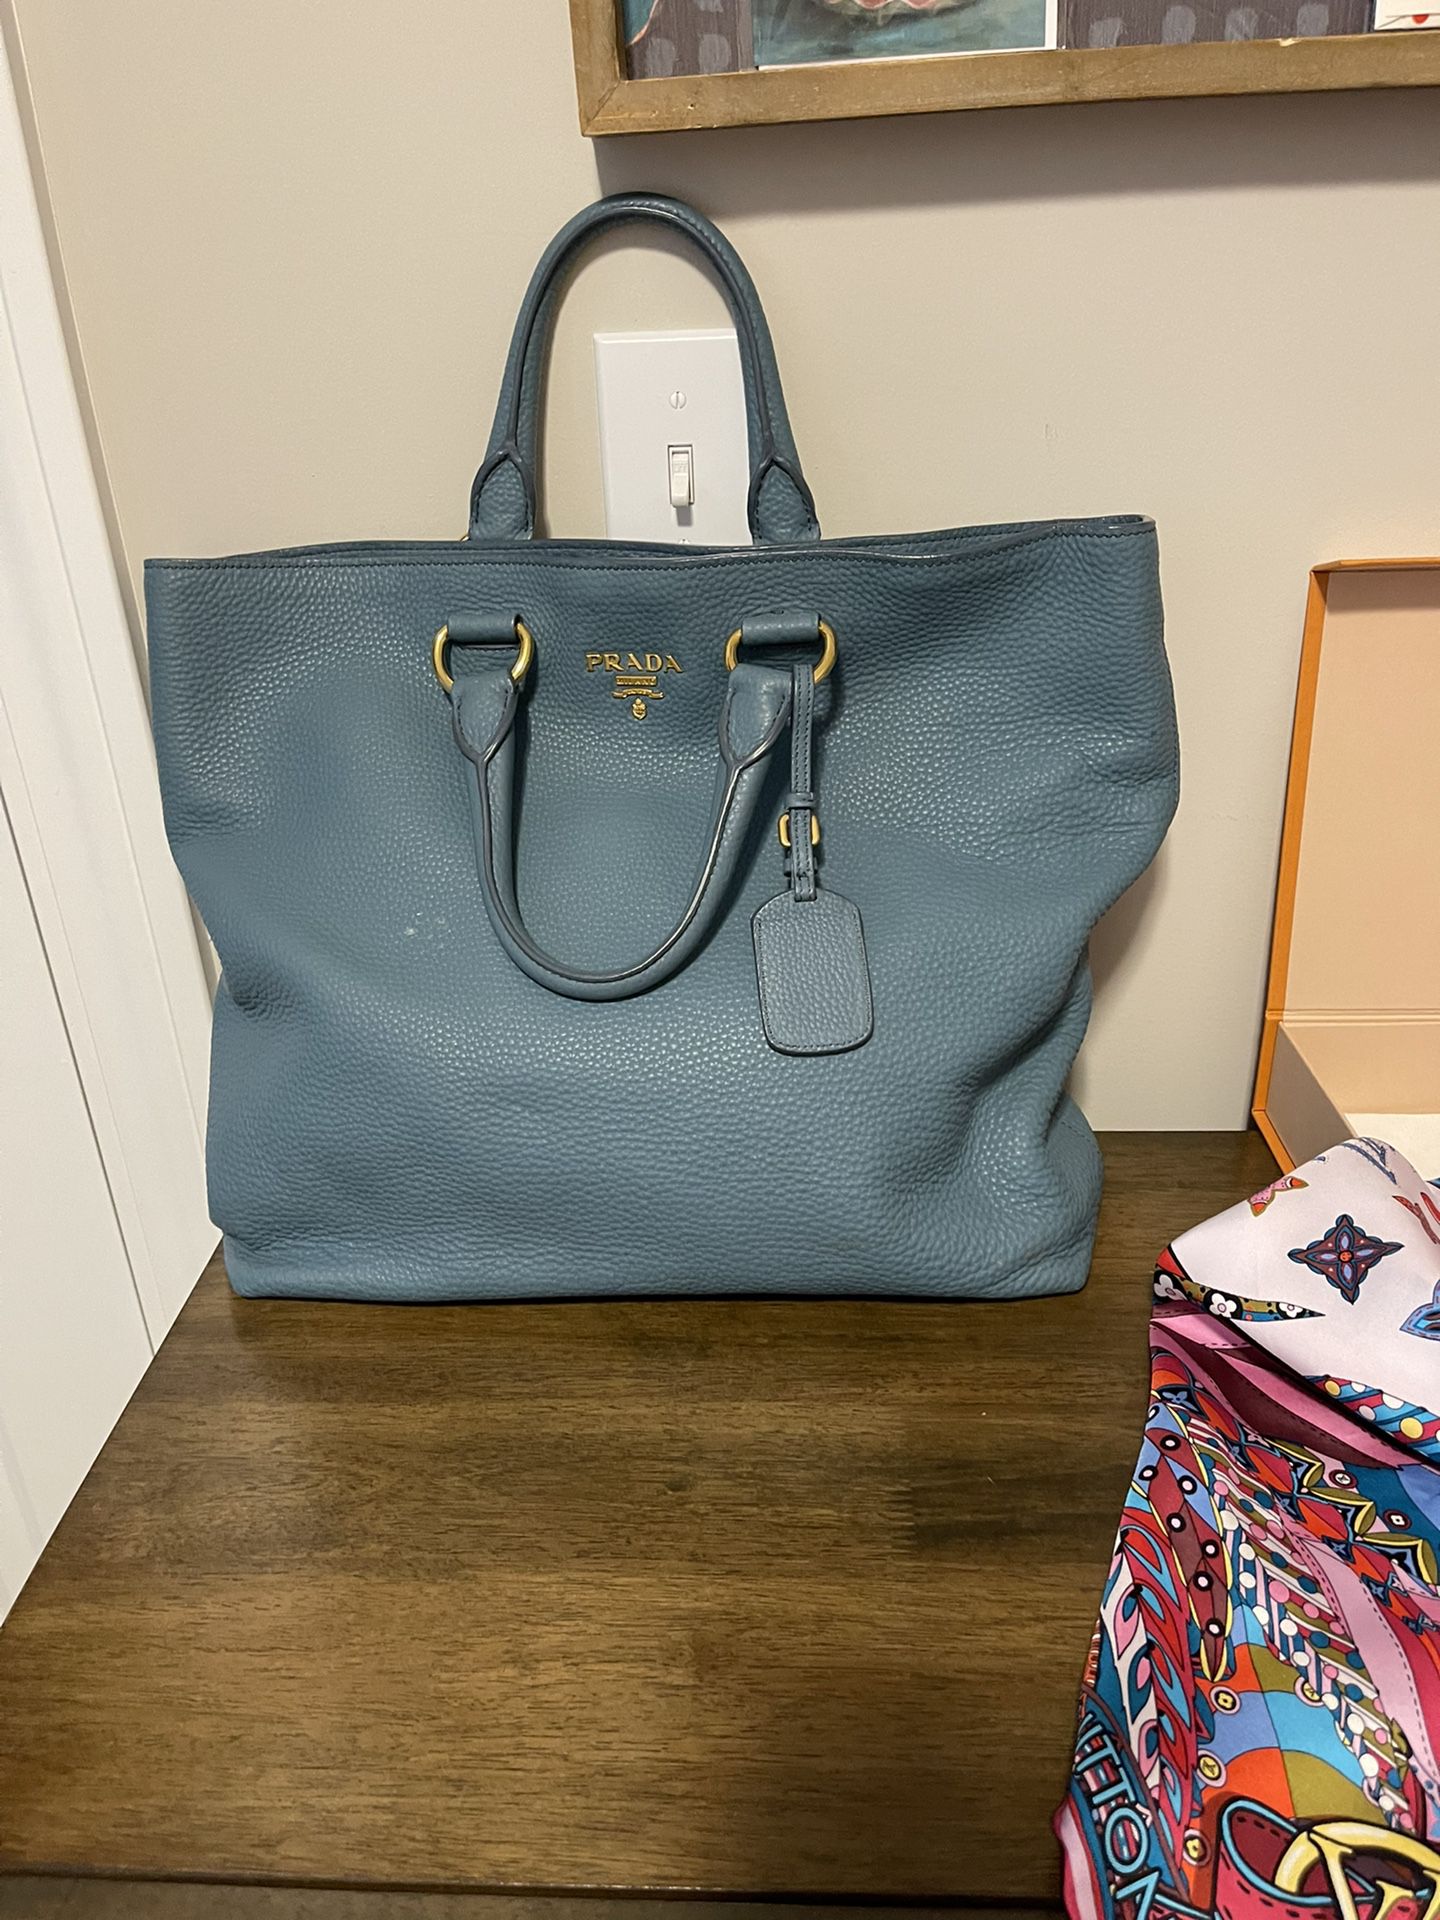 Prada Womens Tote Bag , Authentic , Teal Color, Medium Size, Very Deep To Hold A lot Of Items